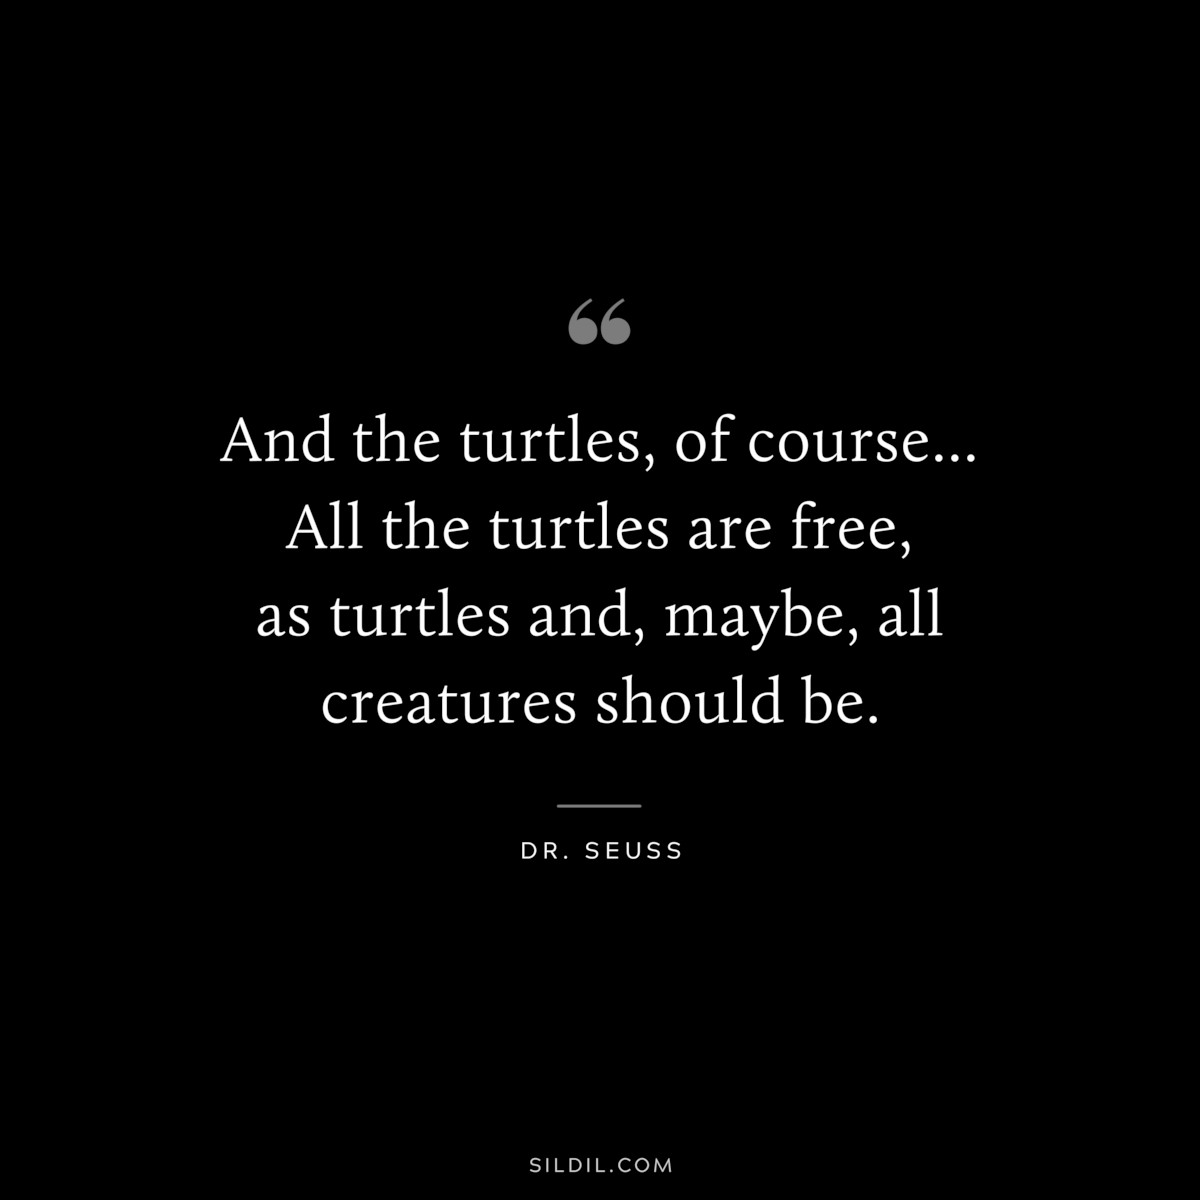 And the turtles, of course... All the turtles are free, as turtles and, maybe, all creatures should be. ― Dr. Seuss